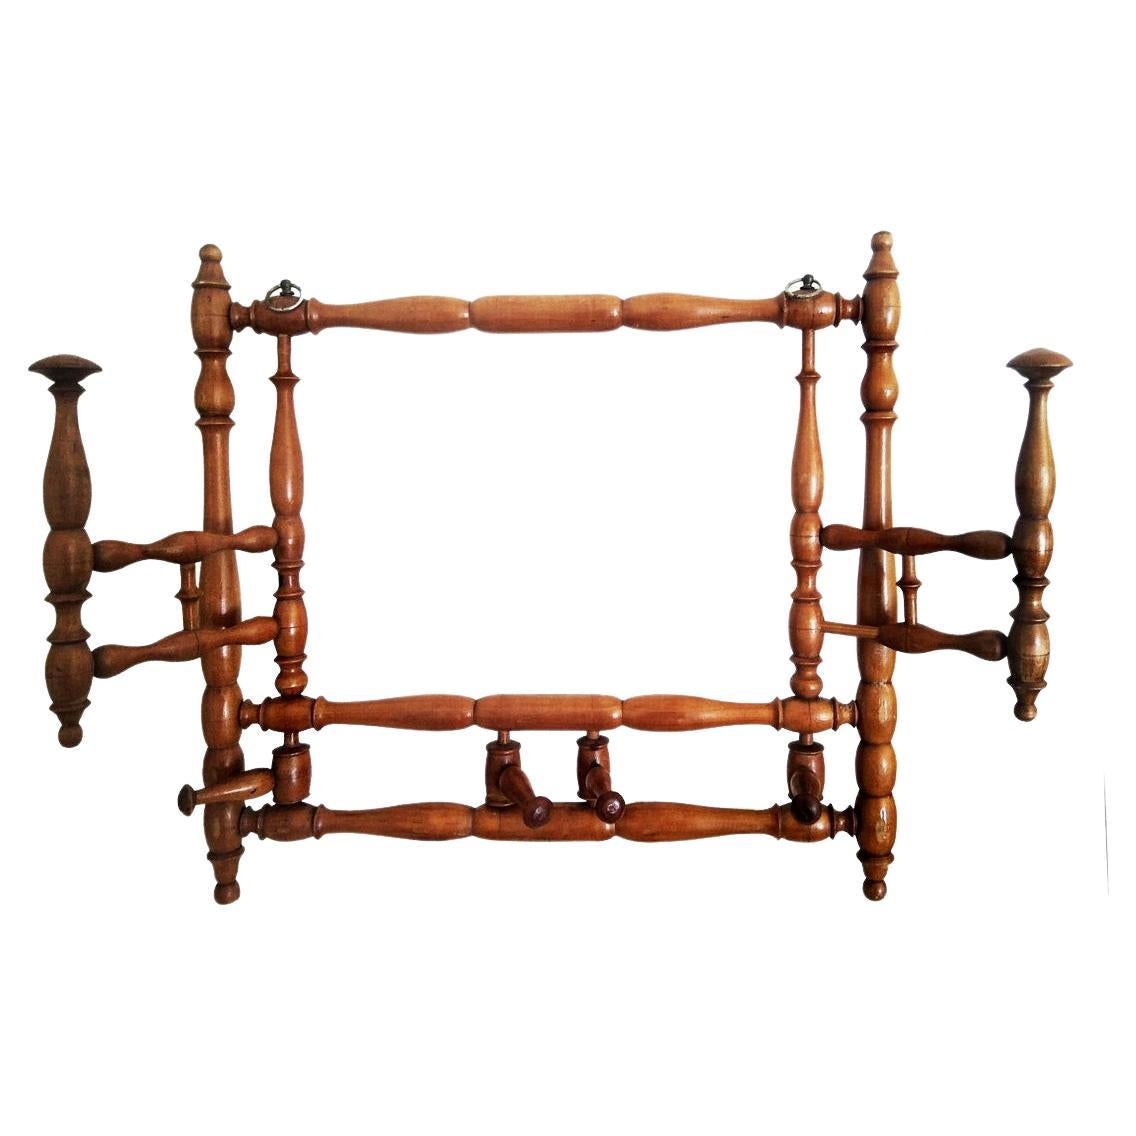 Perfect folding wall coat rack ideal for places of transit or small spaces since it can be folded if it is not being used
19th Century foldable wood wall coat rack,. 

Foldable with 6 hangers Unusual and original wall coat rack 
Maintains a